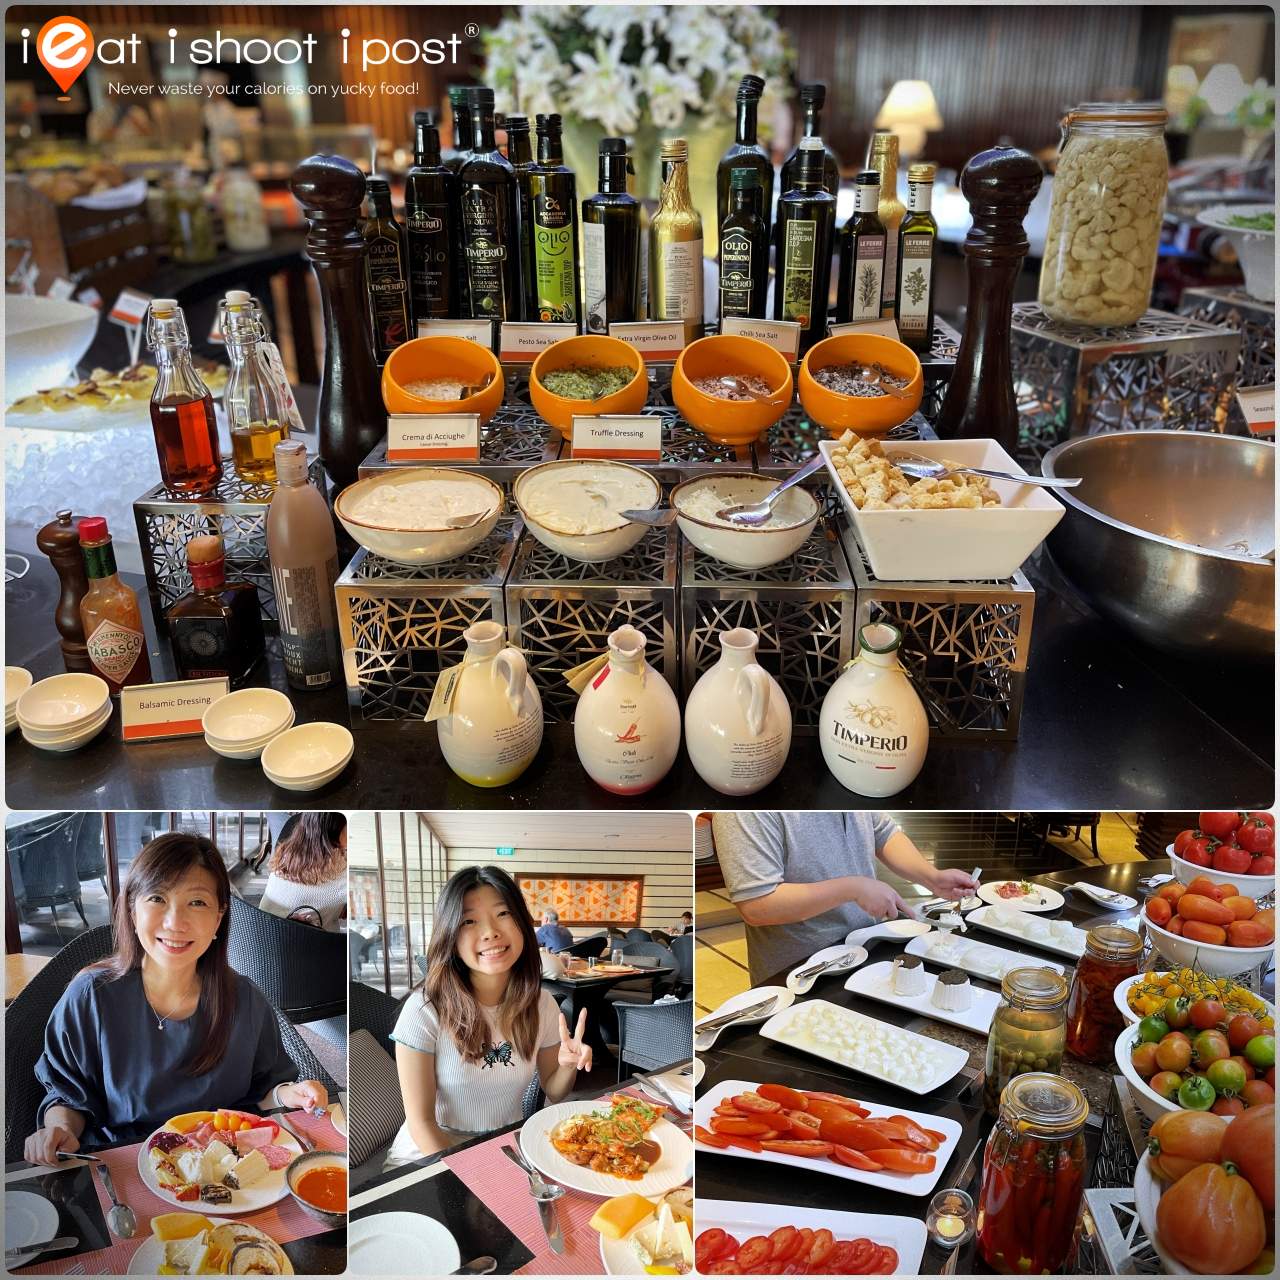 Top: Selection of Olive Oils and dips Bottom: Lisa and Megan with their plates of food and tomato and cheese section